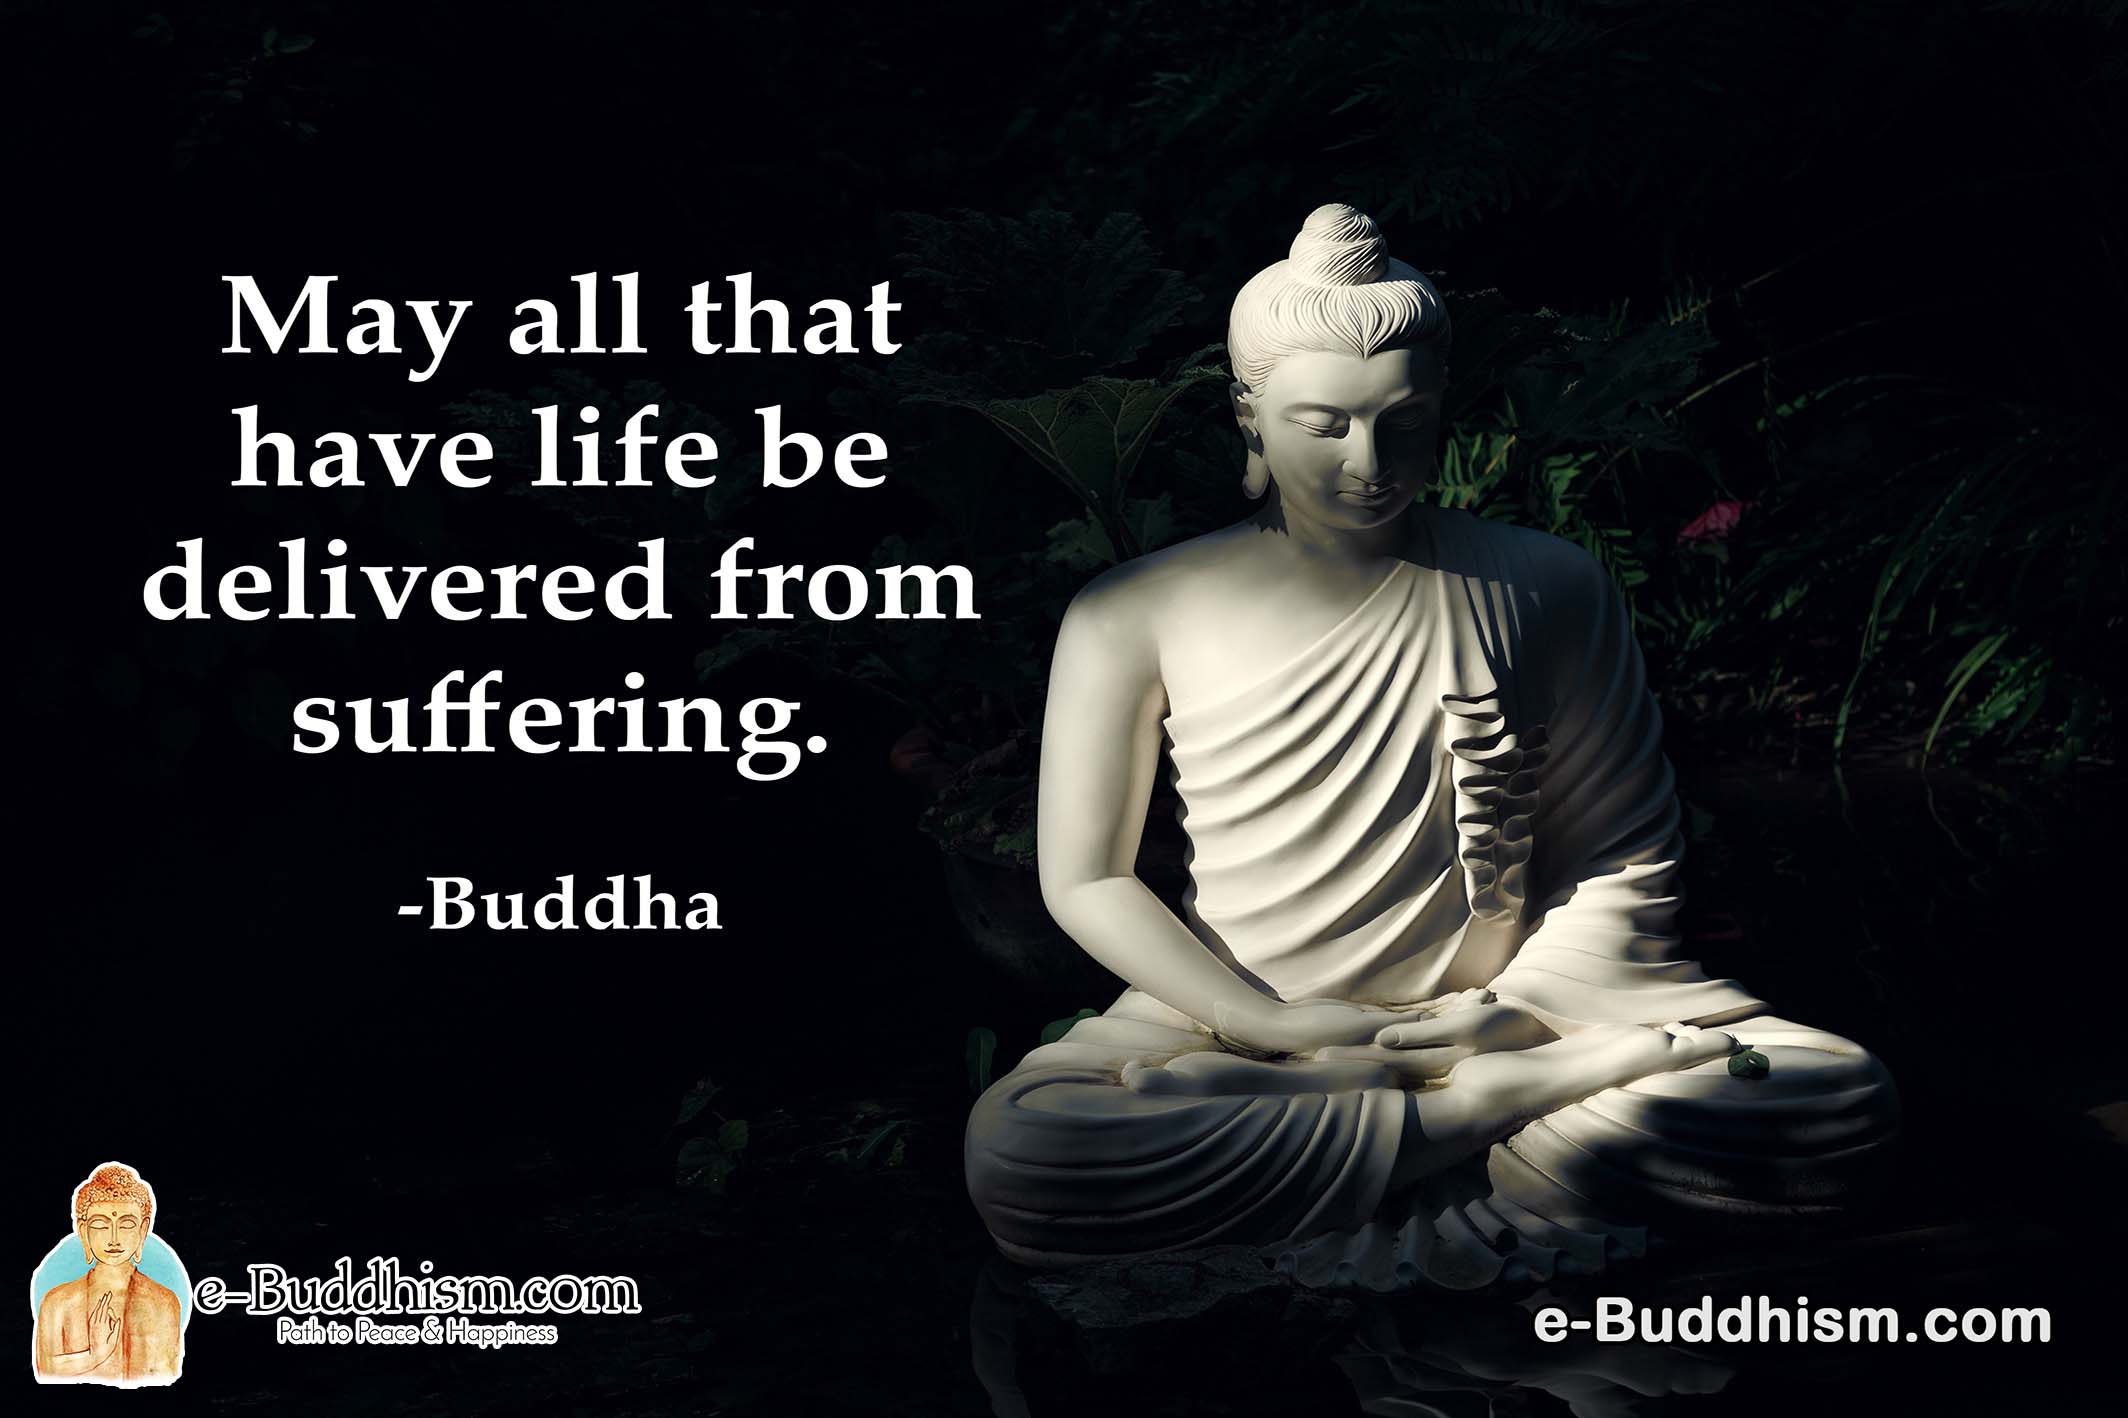 May all that have life be delivered from suffering. -Buddha